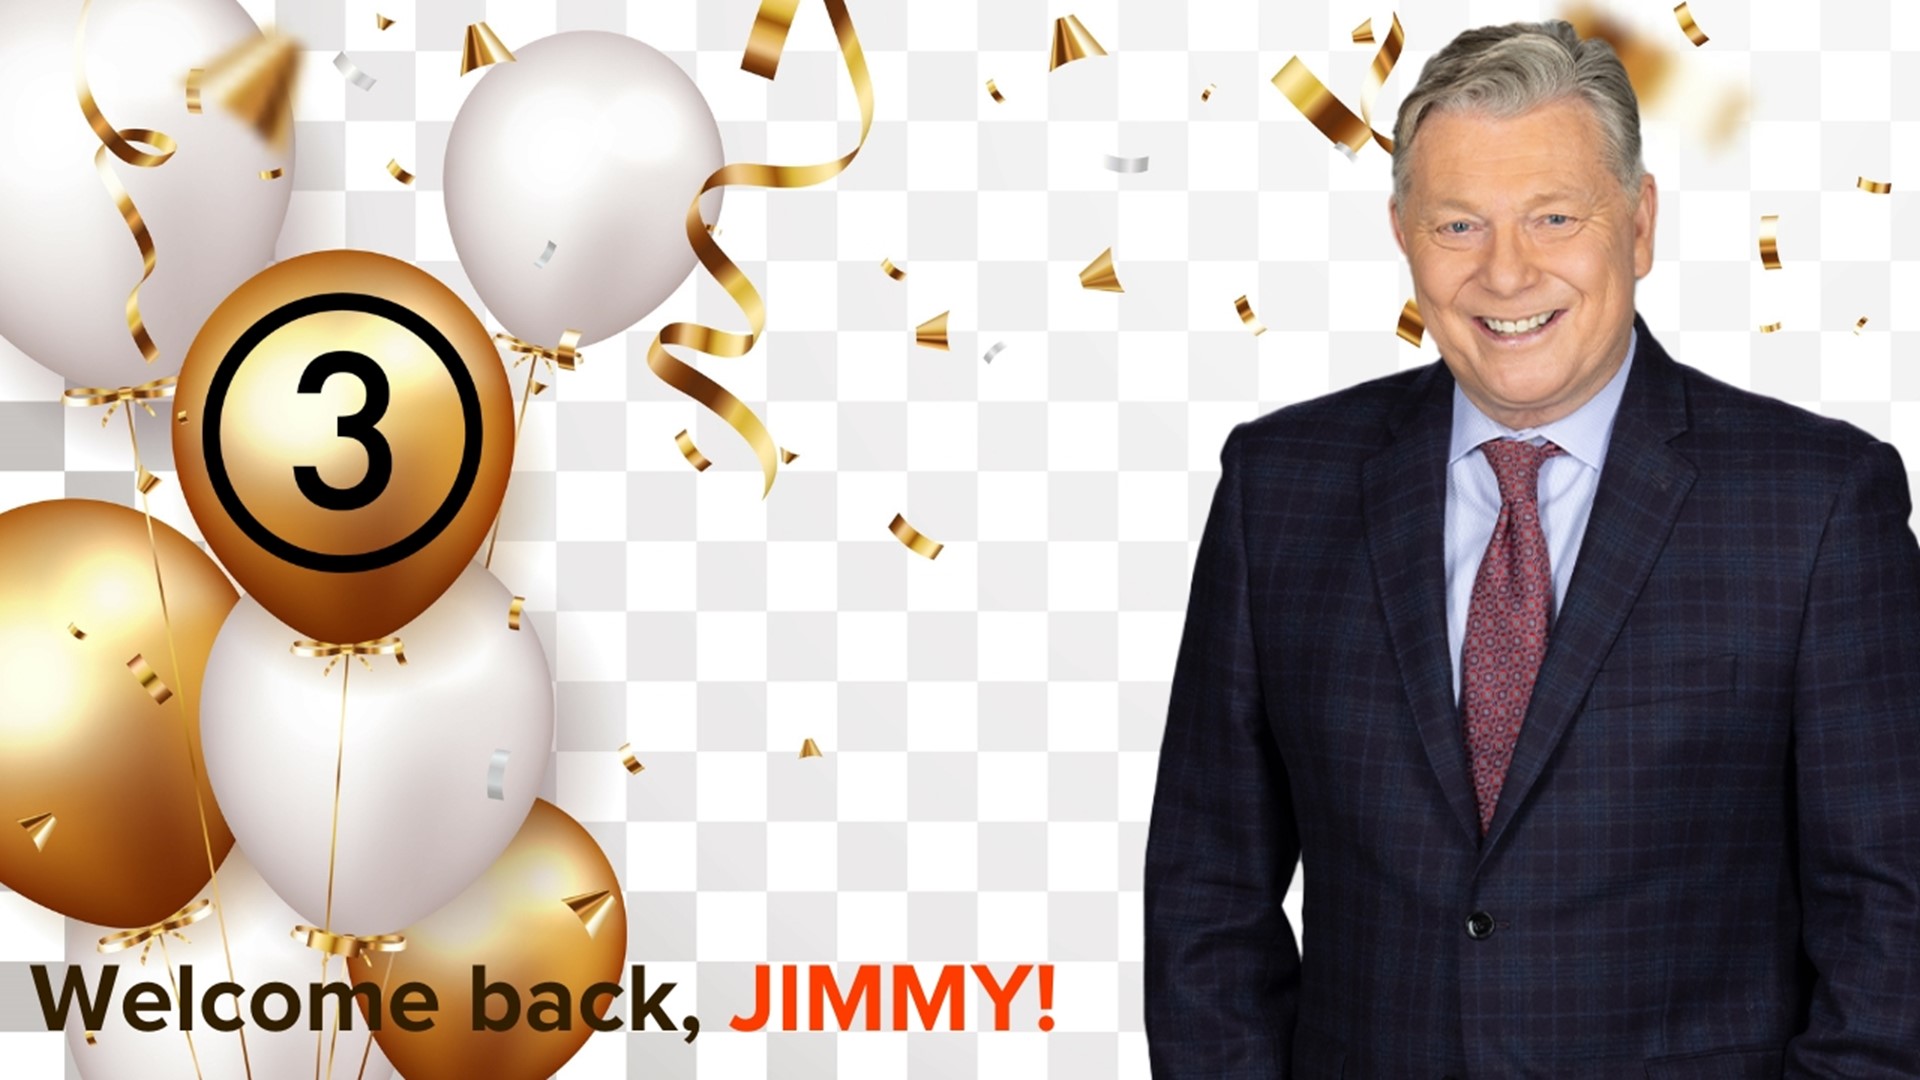 Jimmy will be back behind the microphone for the Browns-Steelers game this Sunday and will return to WKYC on Monday.